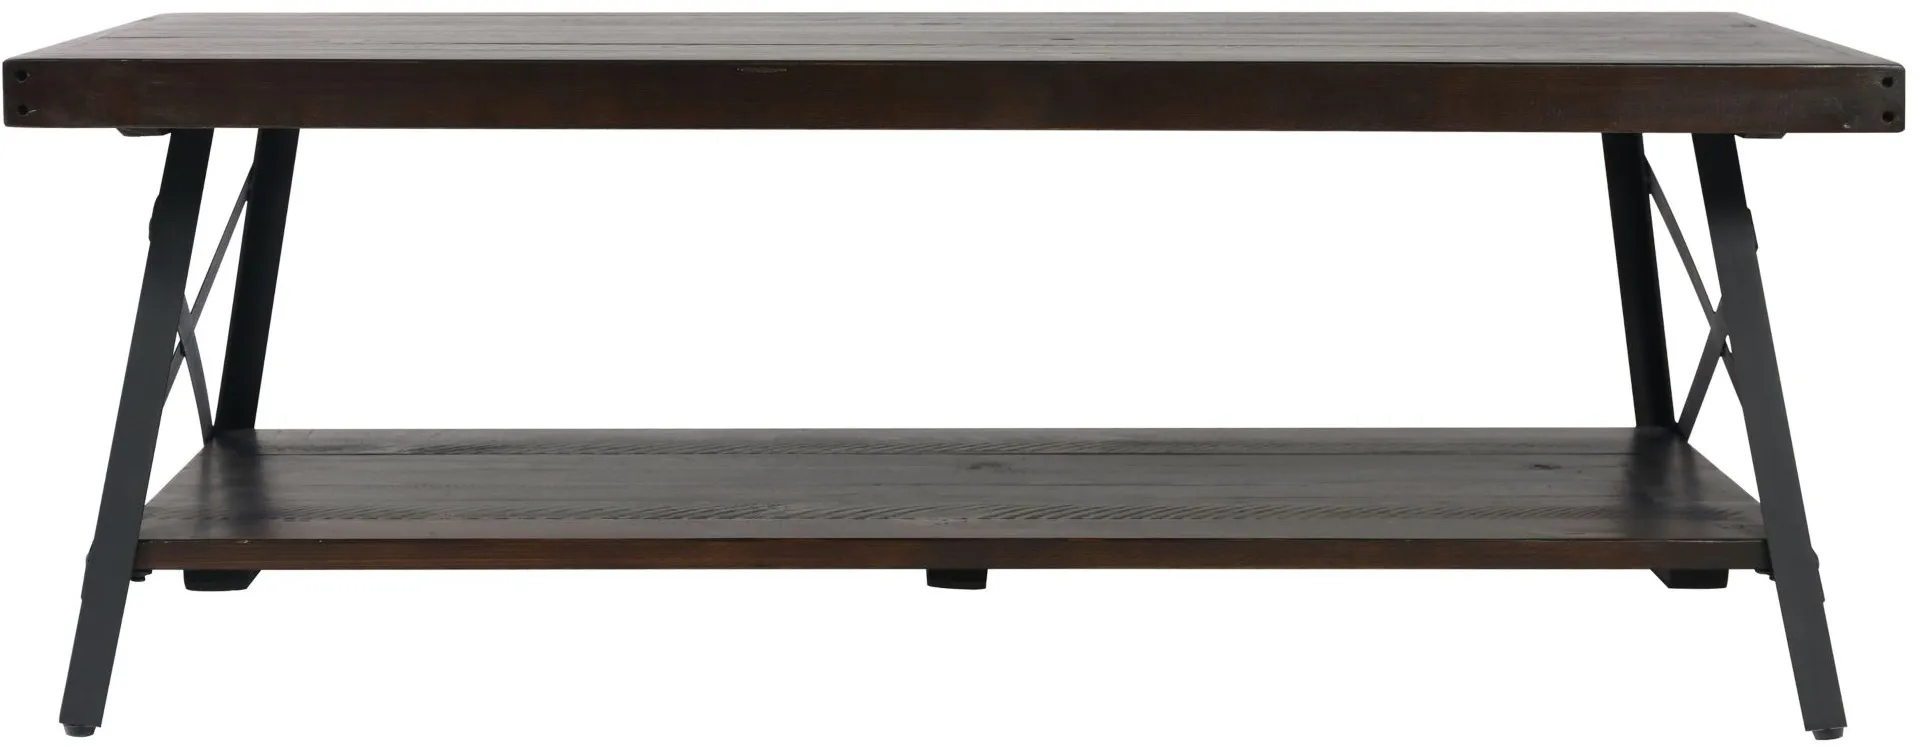 Chandler Coffee Table in espresso brown by Emerald Home Furnishings